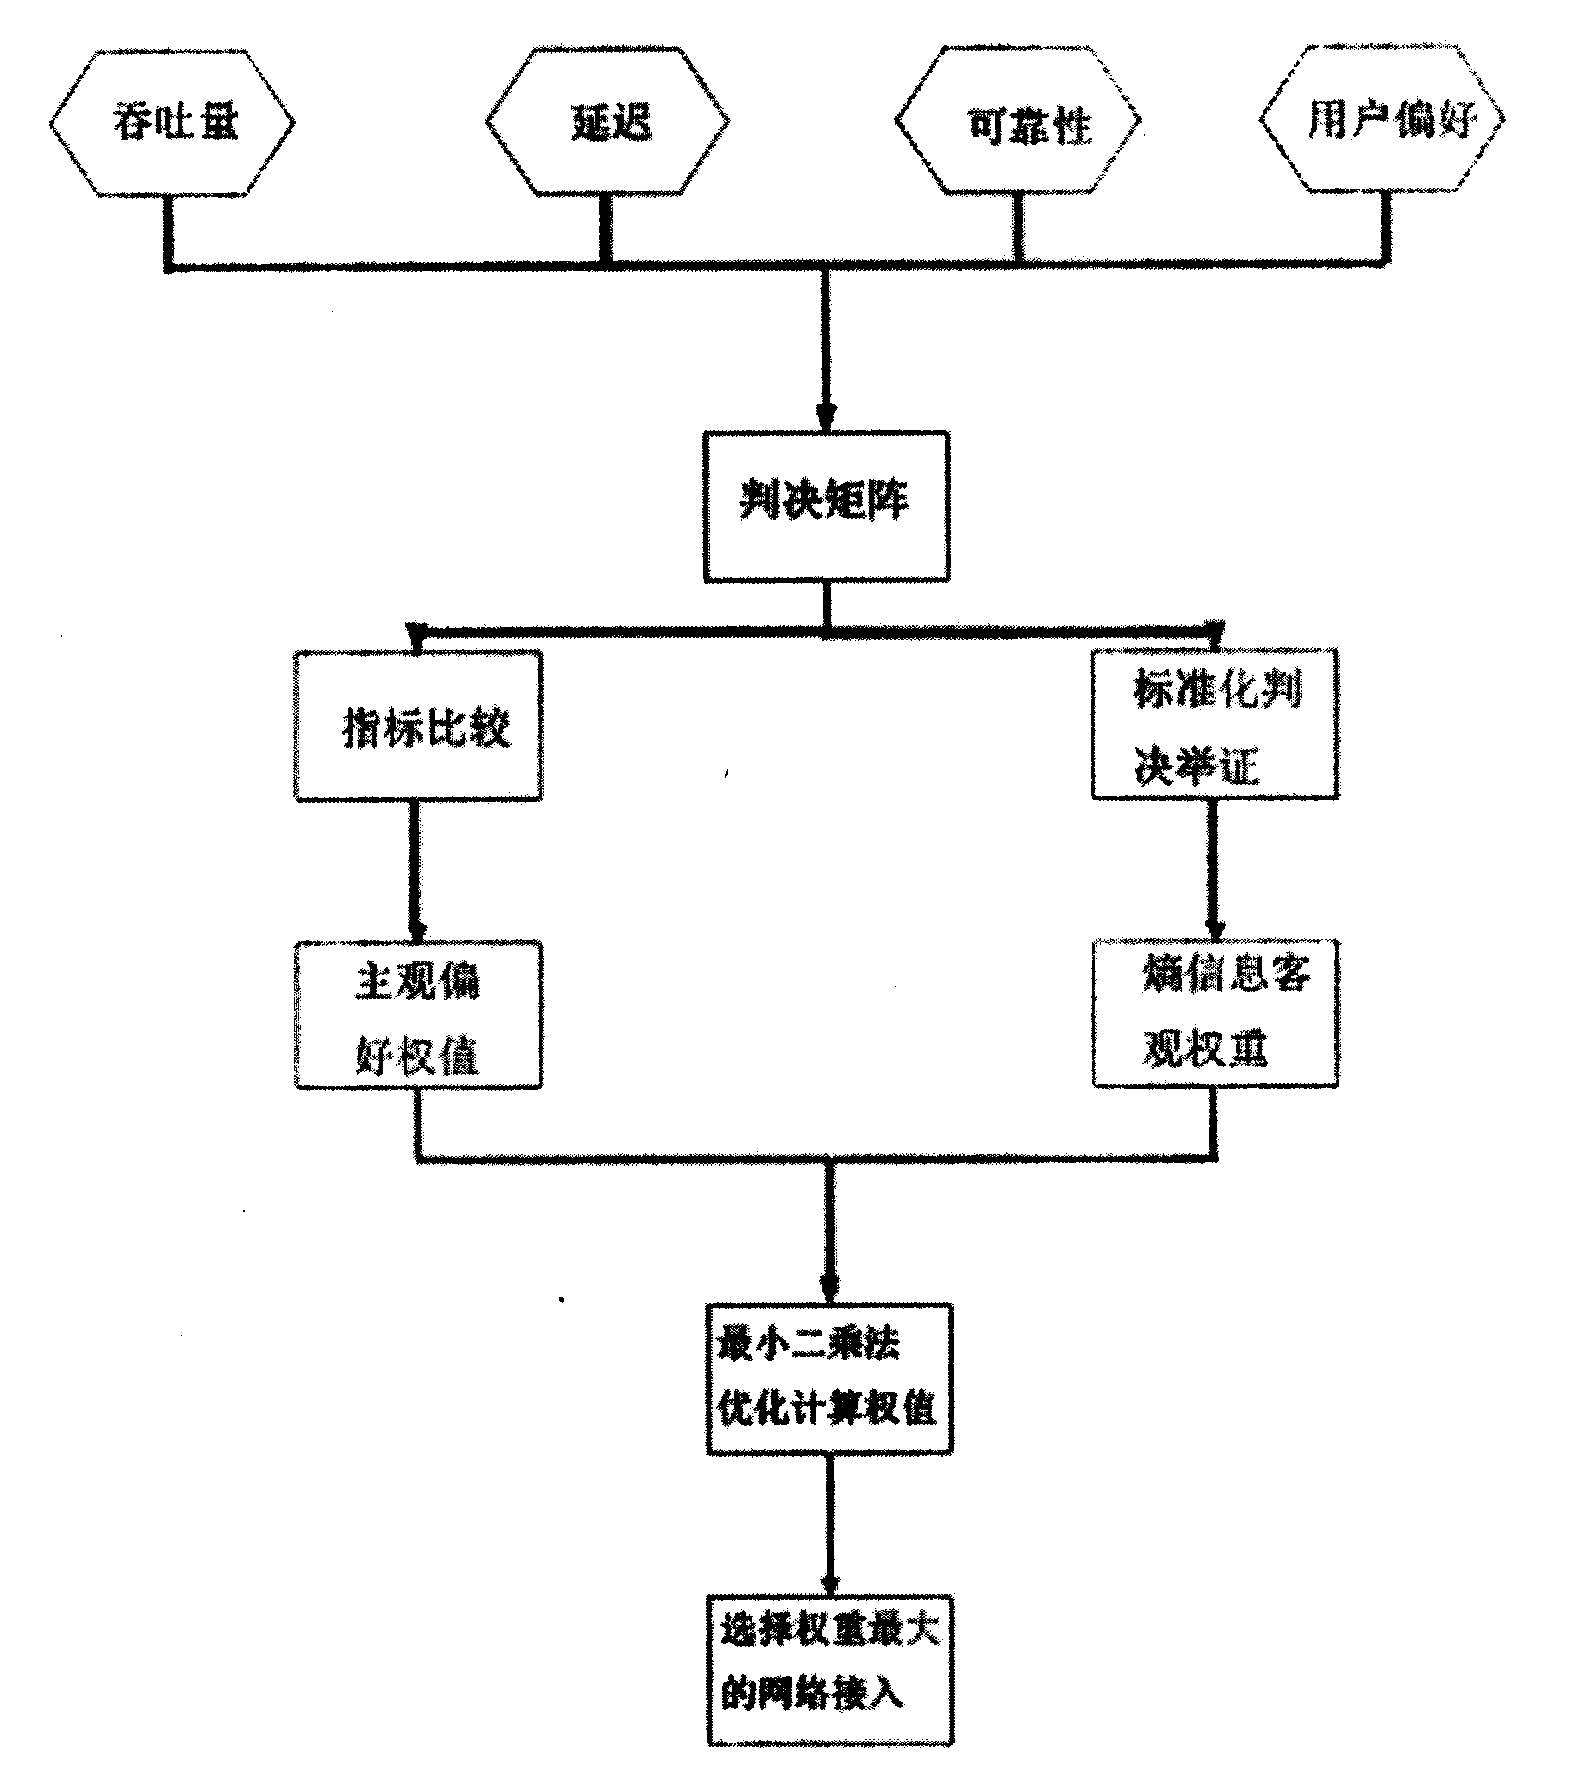 Decision-making method for multi-radio access selection of cognitive radio network